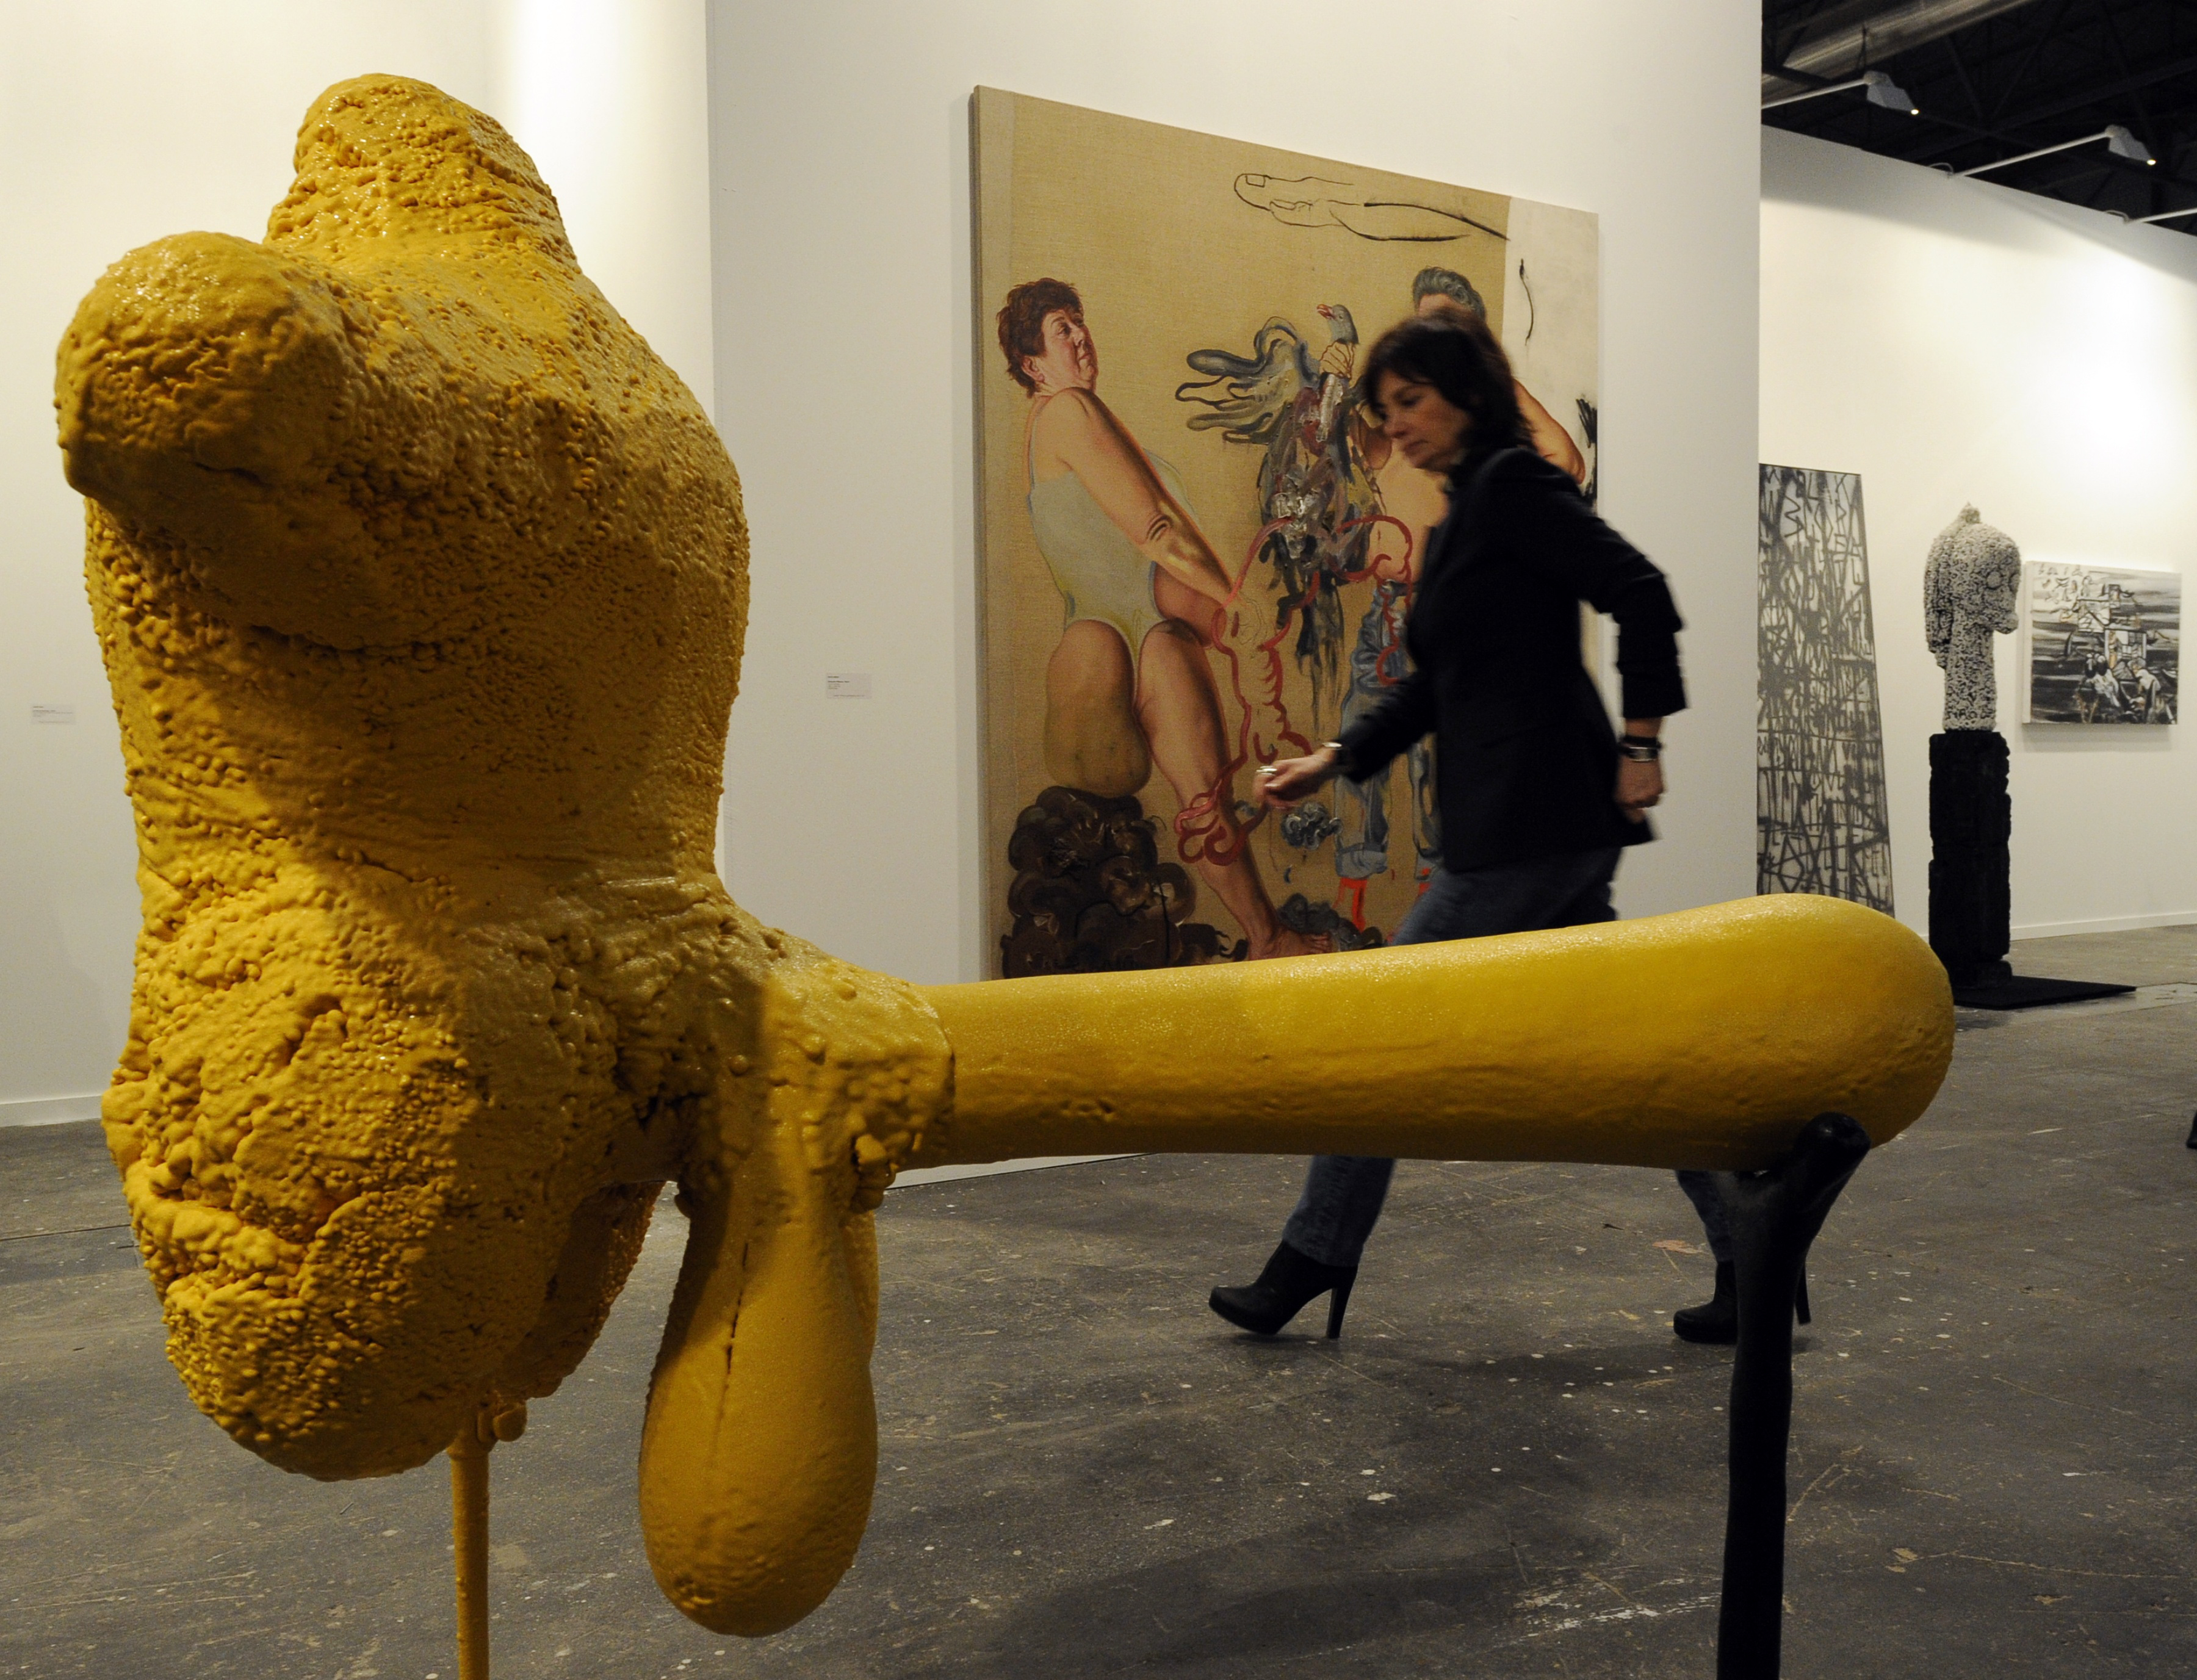 A woman walks past a sculpture, "Le Magnifique," by Dutch artist Atelier Van Lieshout shown at the Belgian Tim Van Laere Gallery on February 16, 2011 during the ARCO International Contemporary Art Fair in Madrid. [JAVIER SORIANO/AFP/Getty Images]